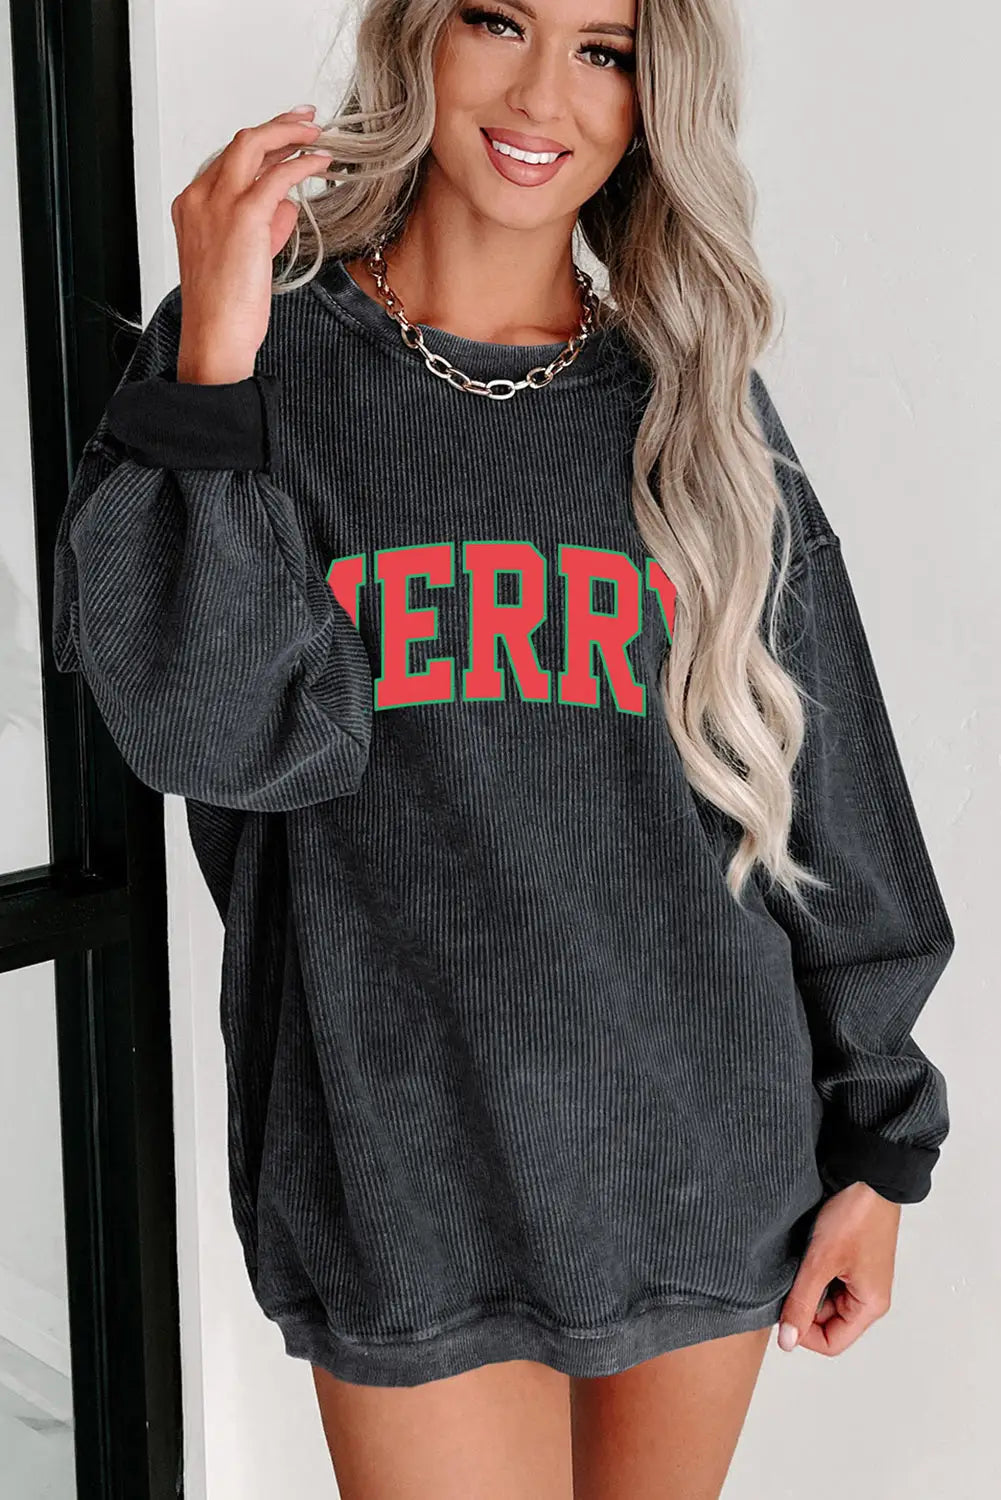 Gray solid ribbed knit round neck pullover sweatshirt - tops